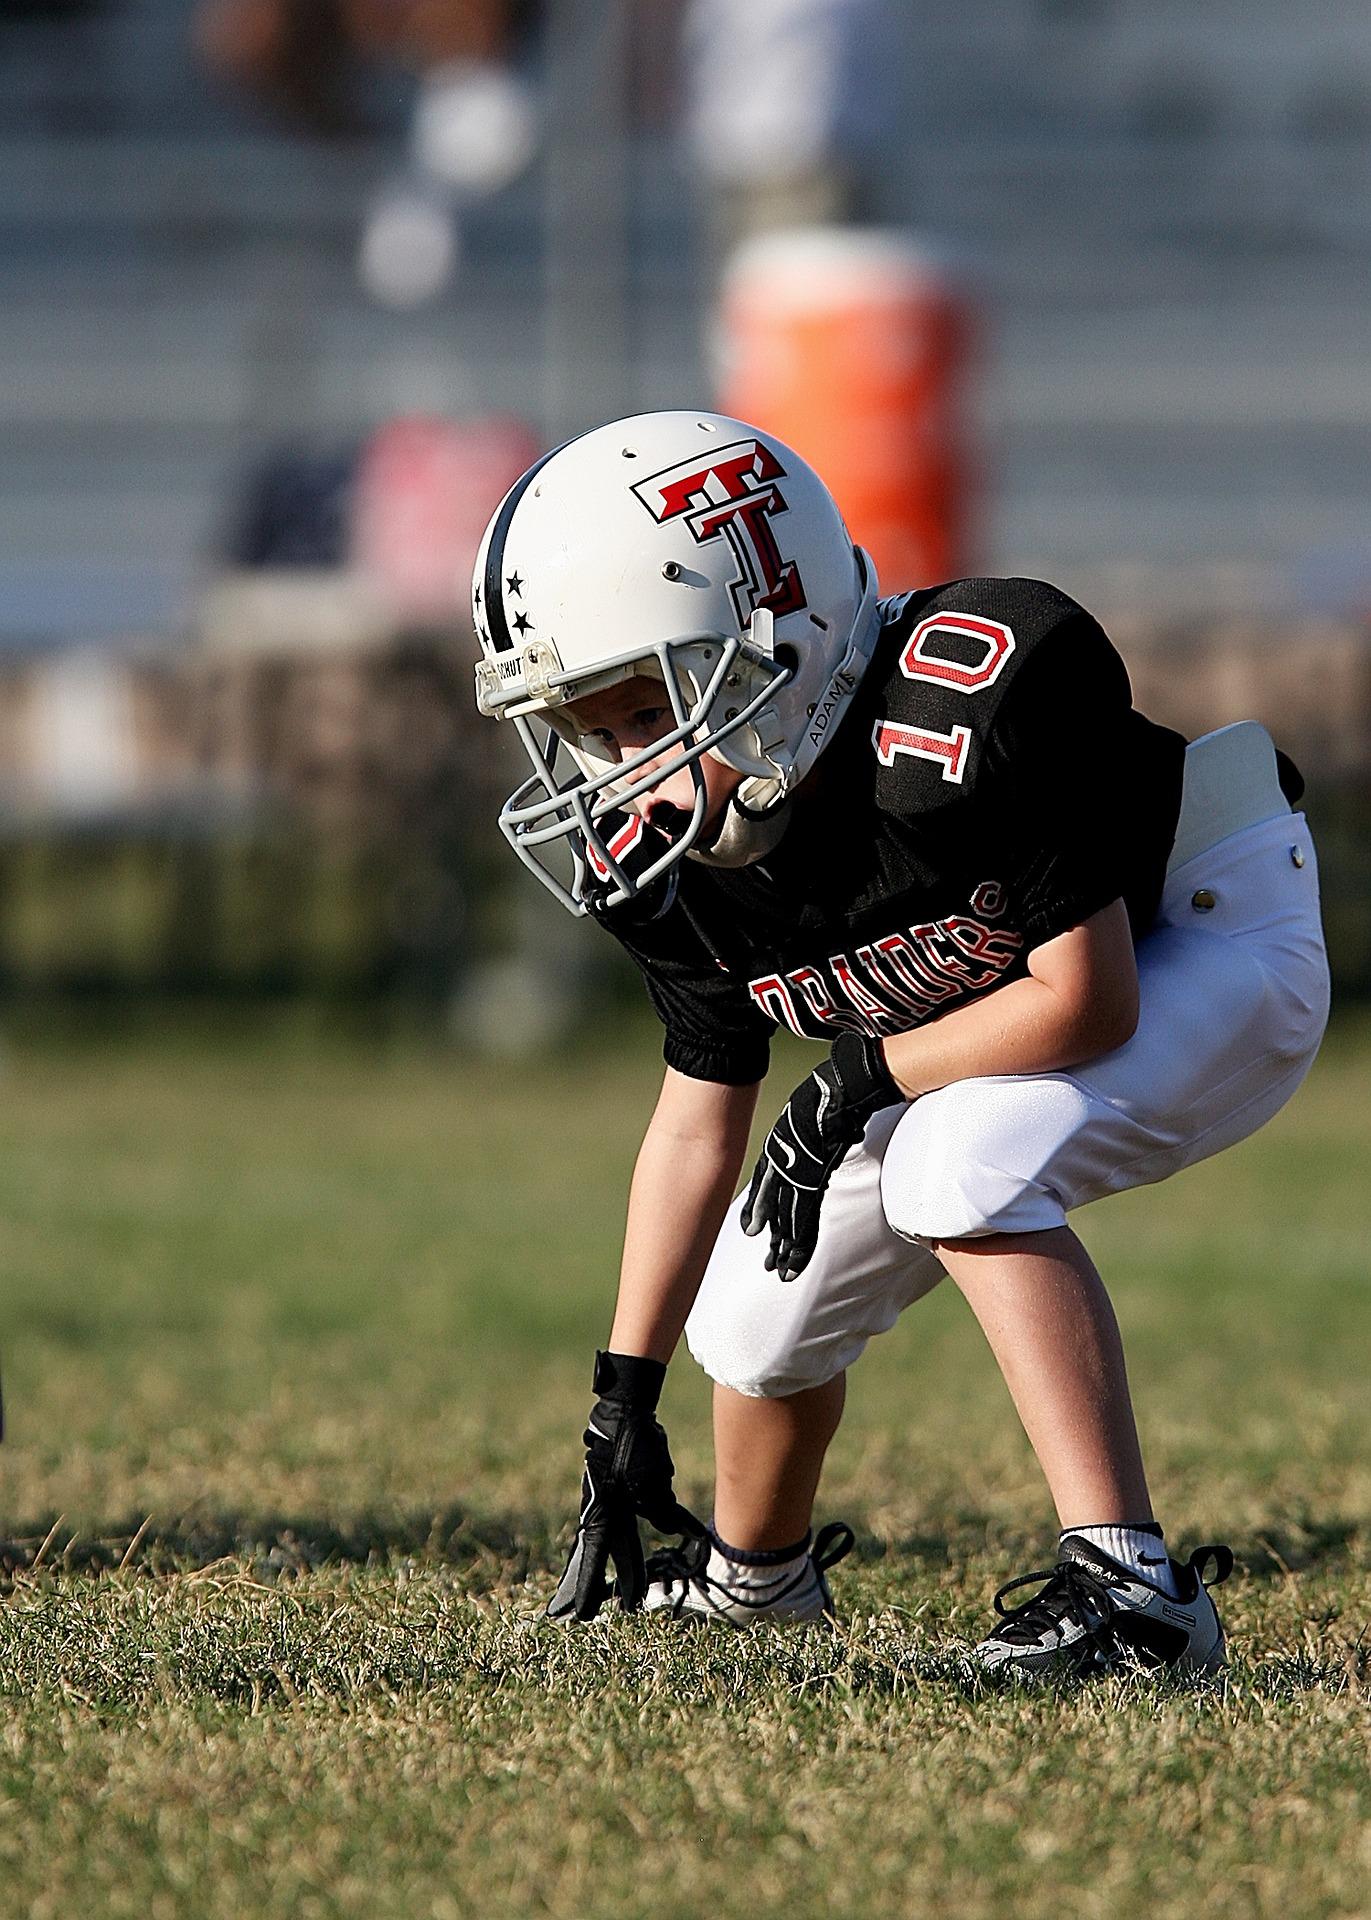 Unsportsmanlike Conduct: Betting on Pee Wee Football